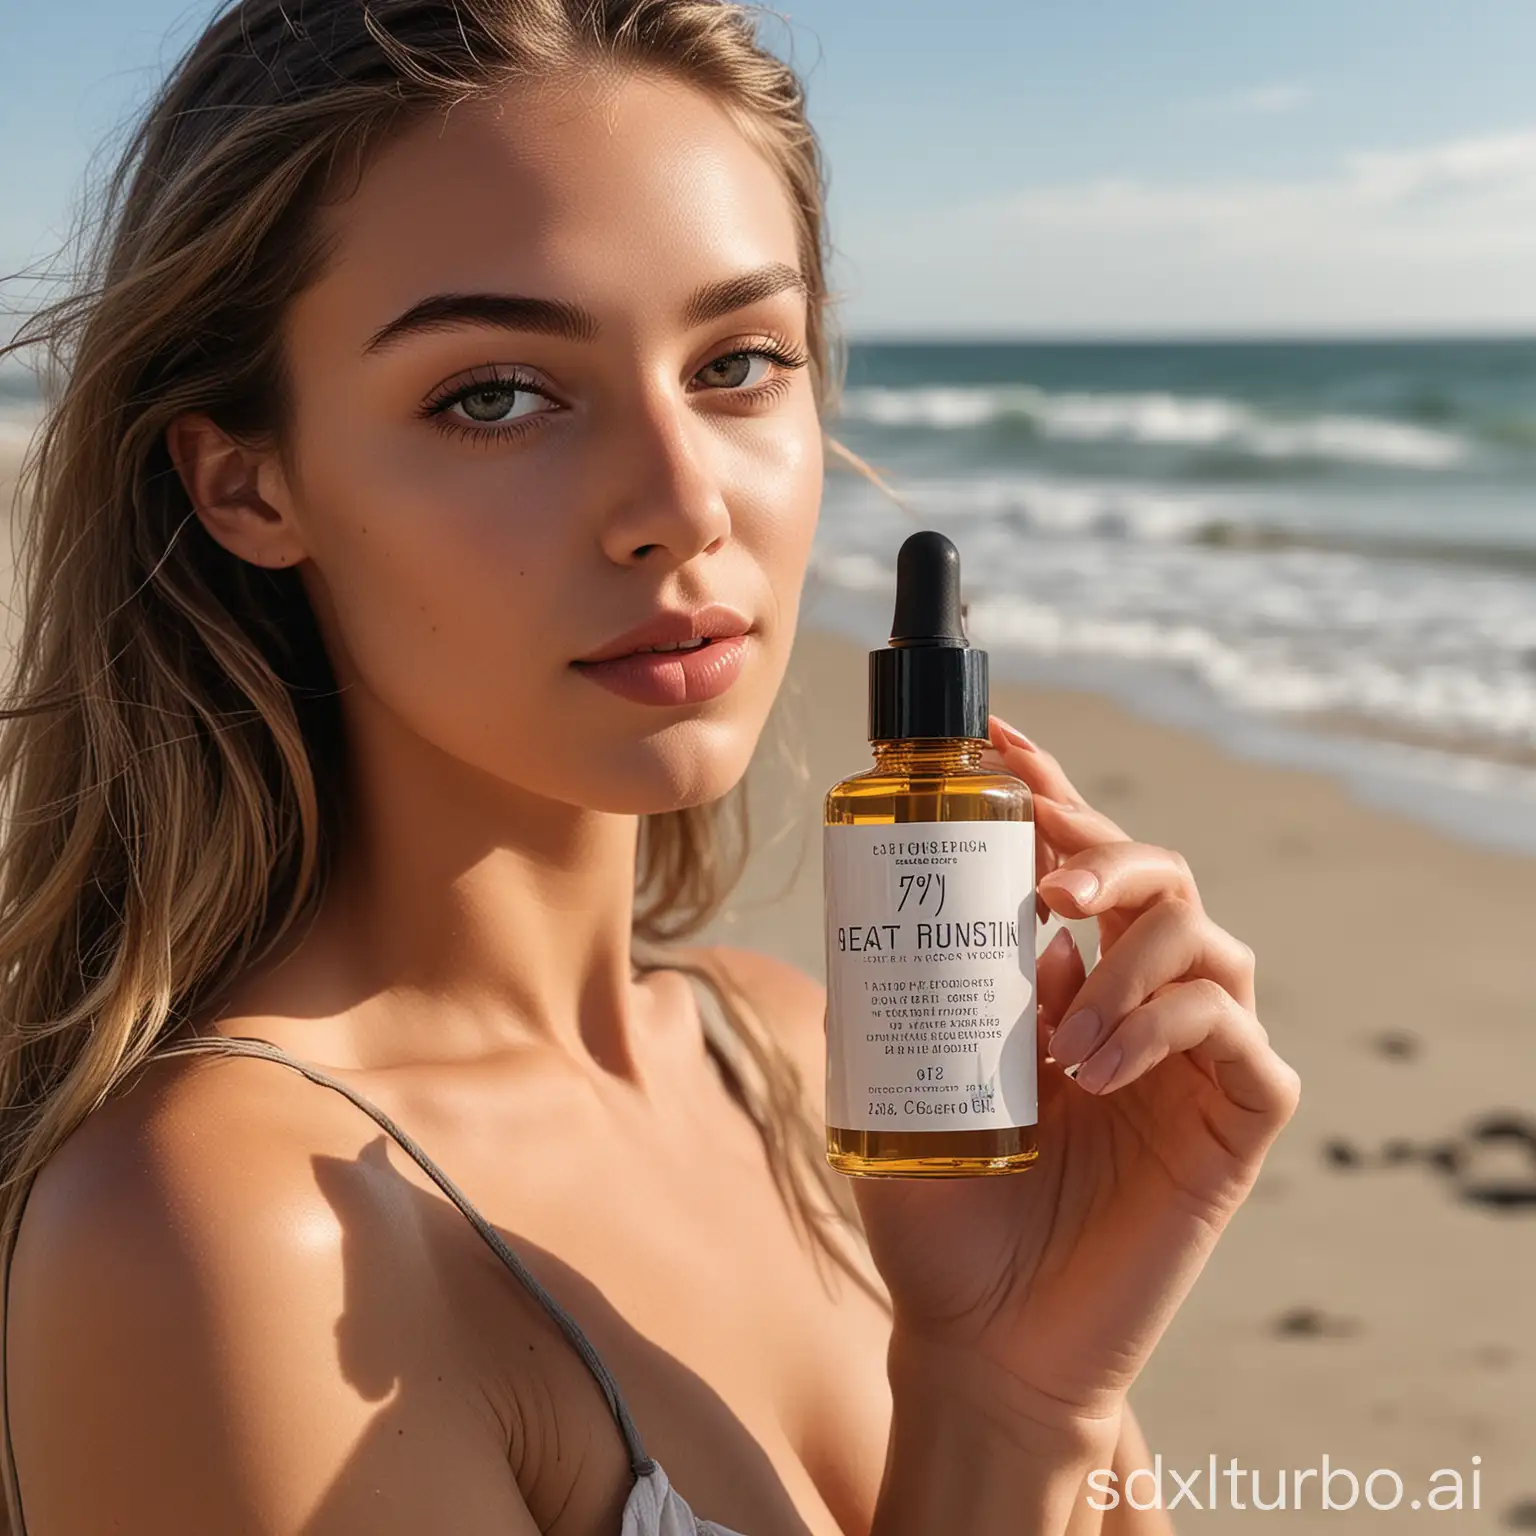 A European American female model holds a 70ml capacity beauty oil product on the beach